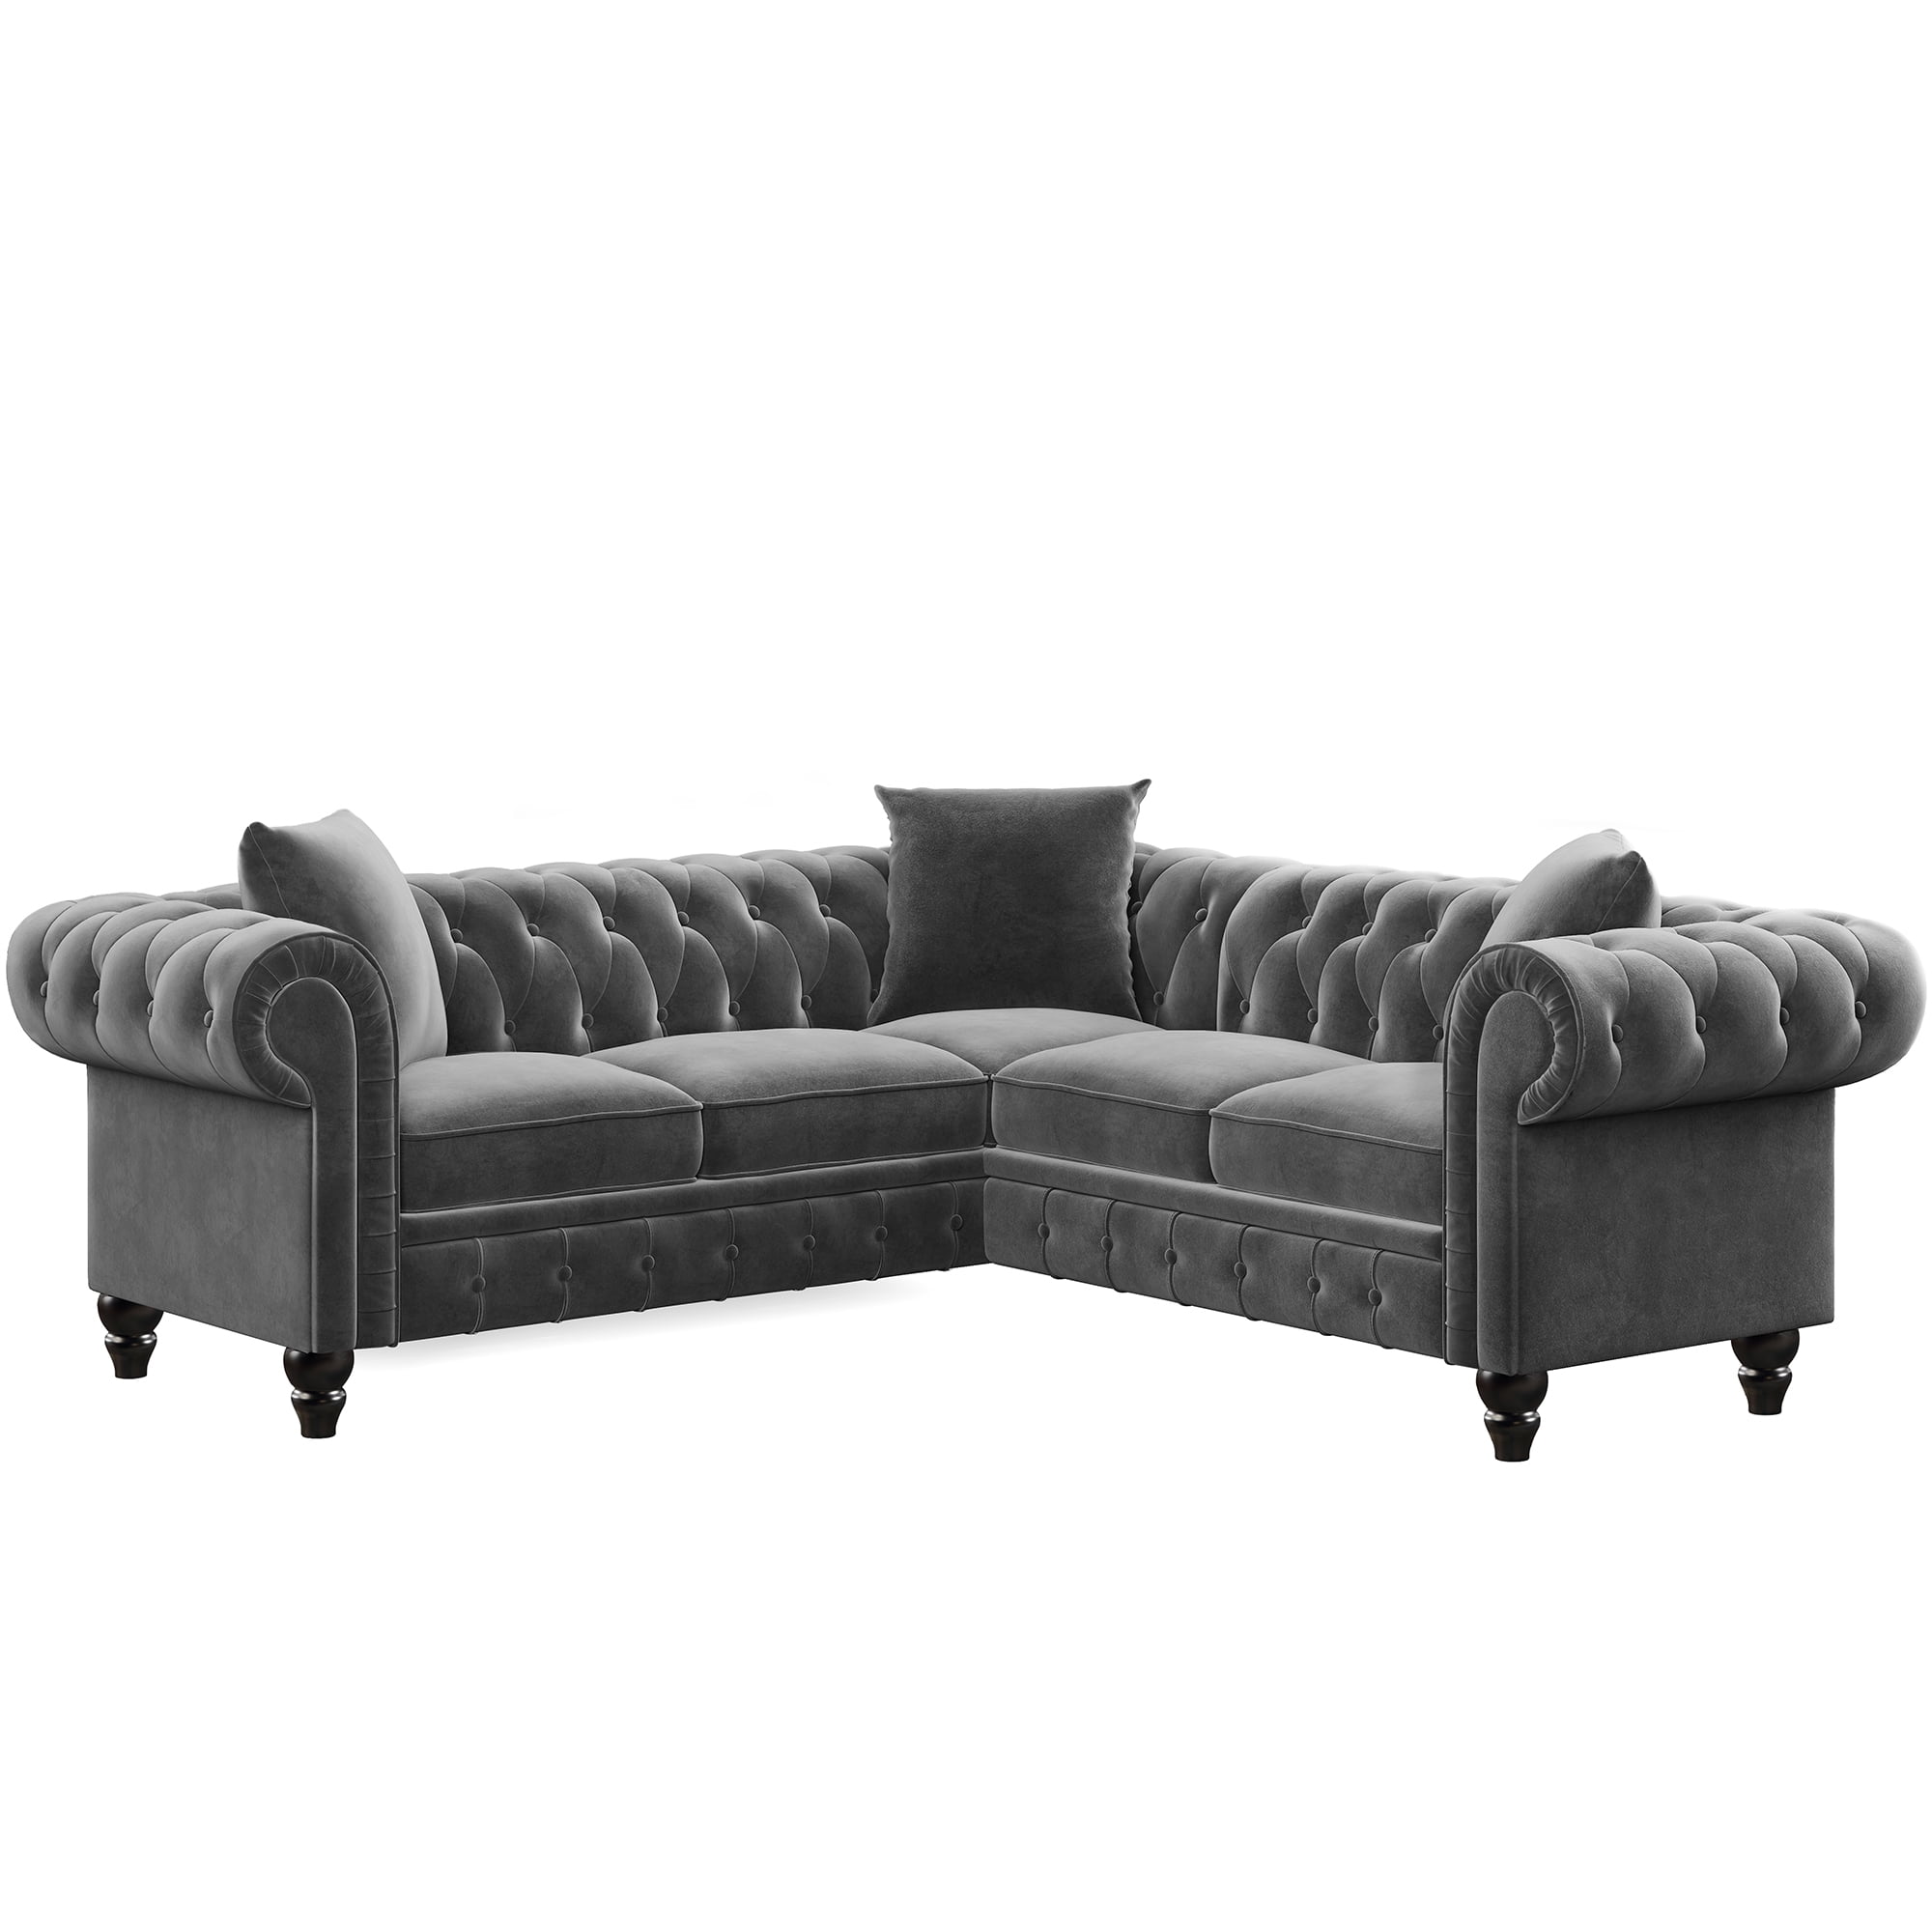 Tufted Chesterfield Loveseat Couches Classic High End Velvet Rolled